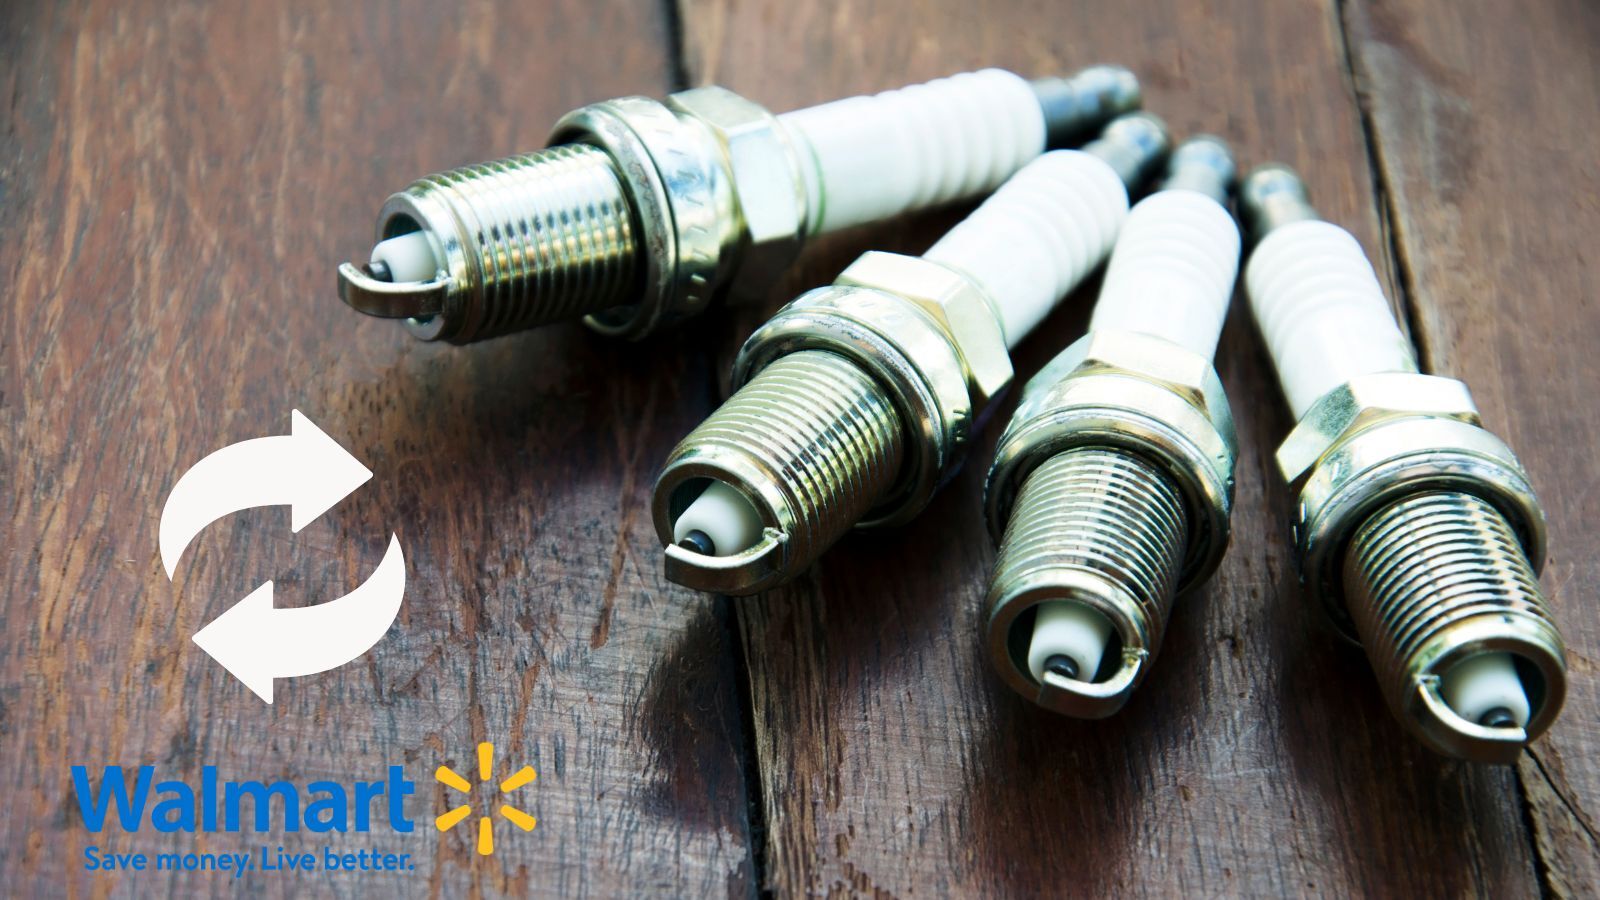 Does Walmart Change Spark Plugs? (Yes, Here Is The Cost)